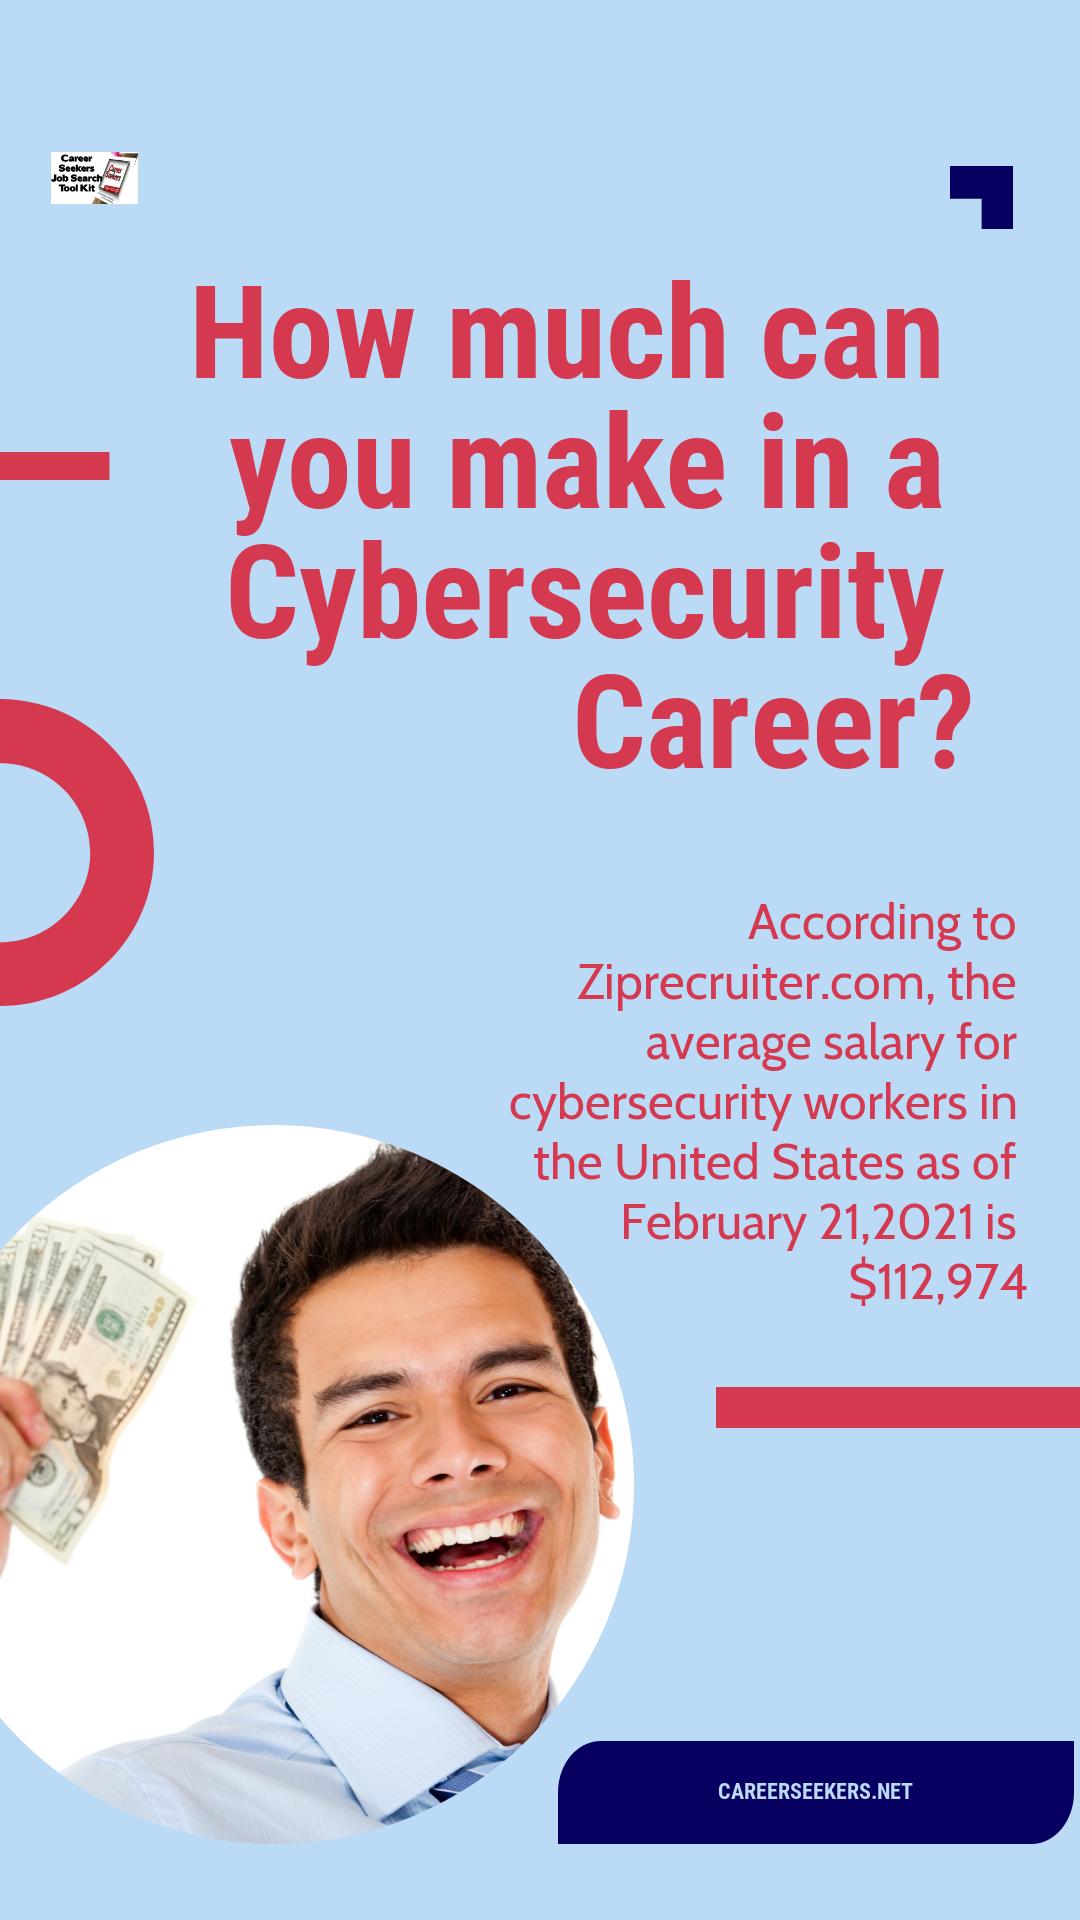 Cybersecurity Training How to Be Ready for Work in 5 Weeks in